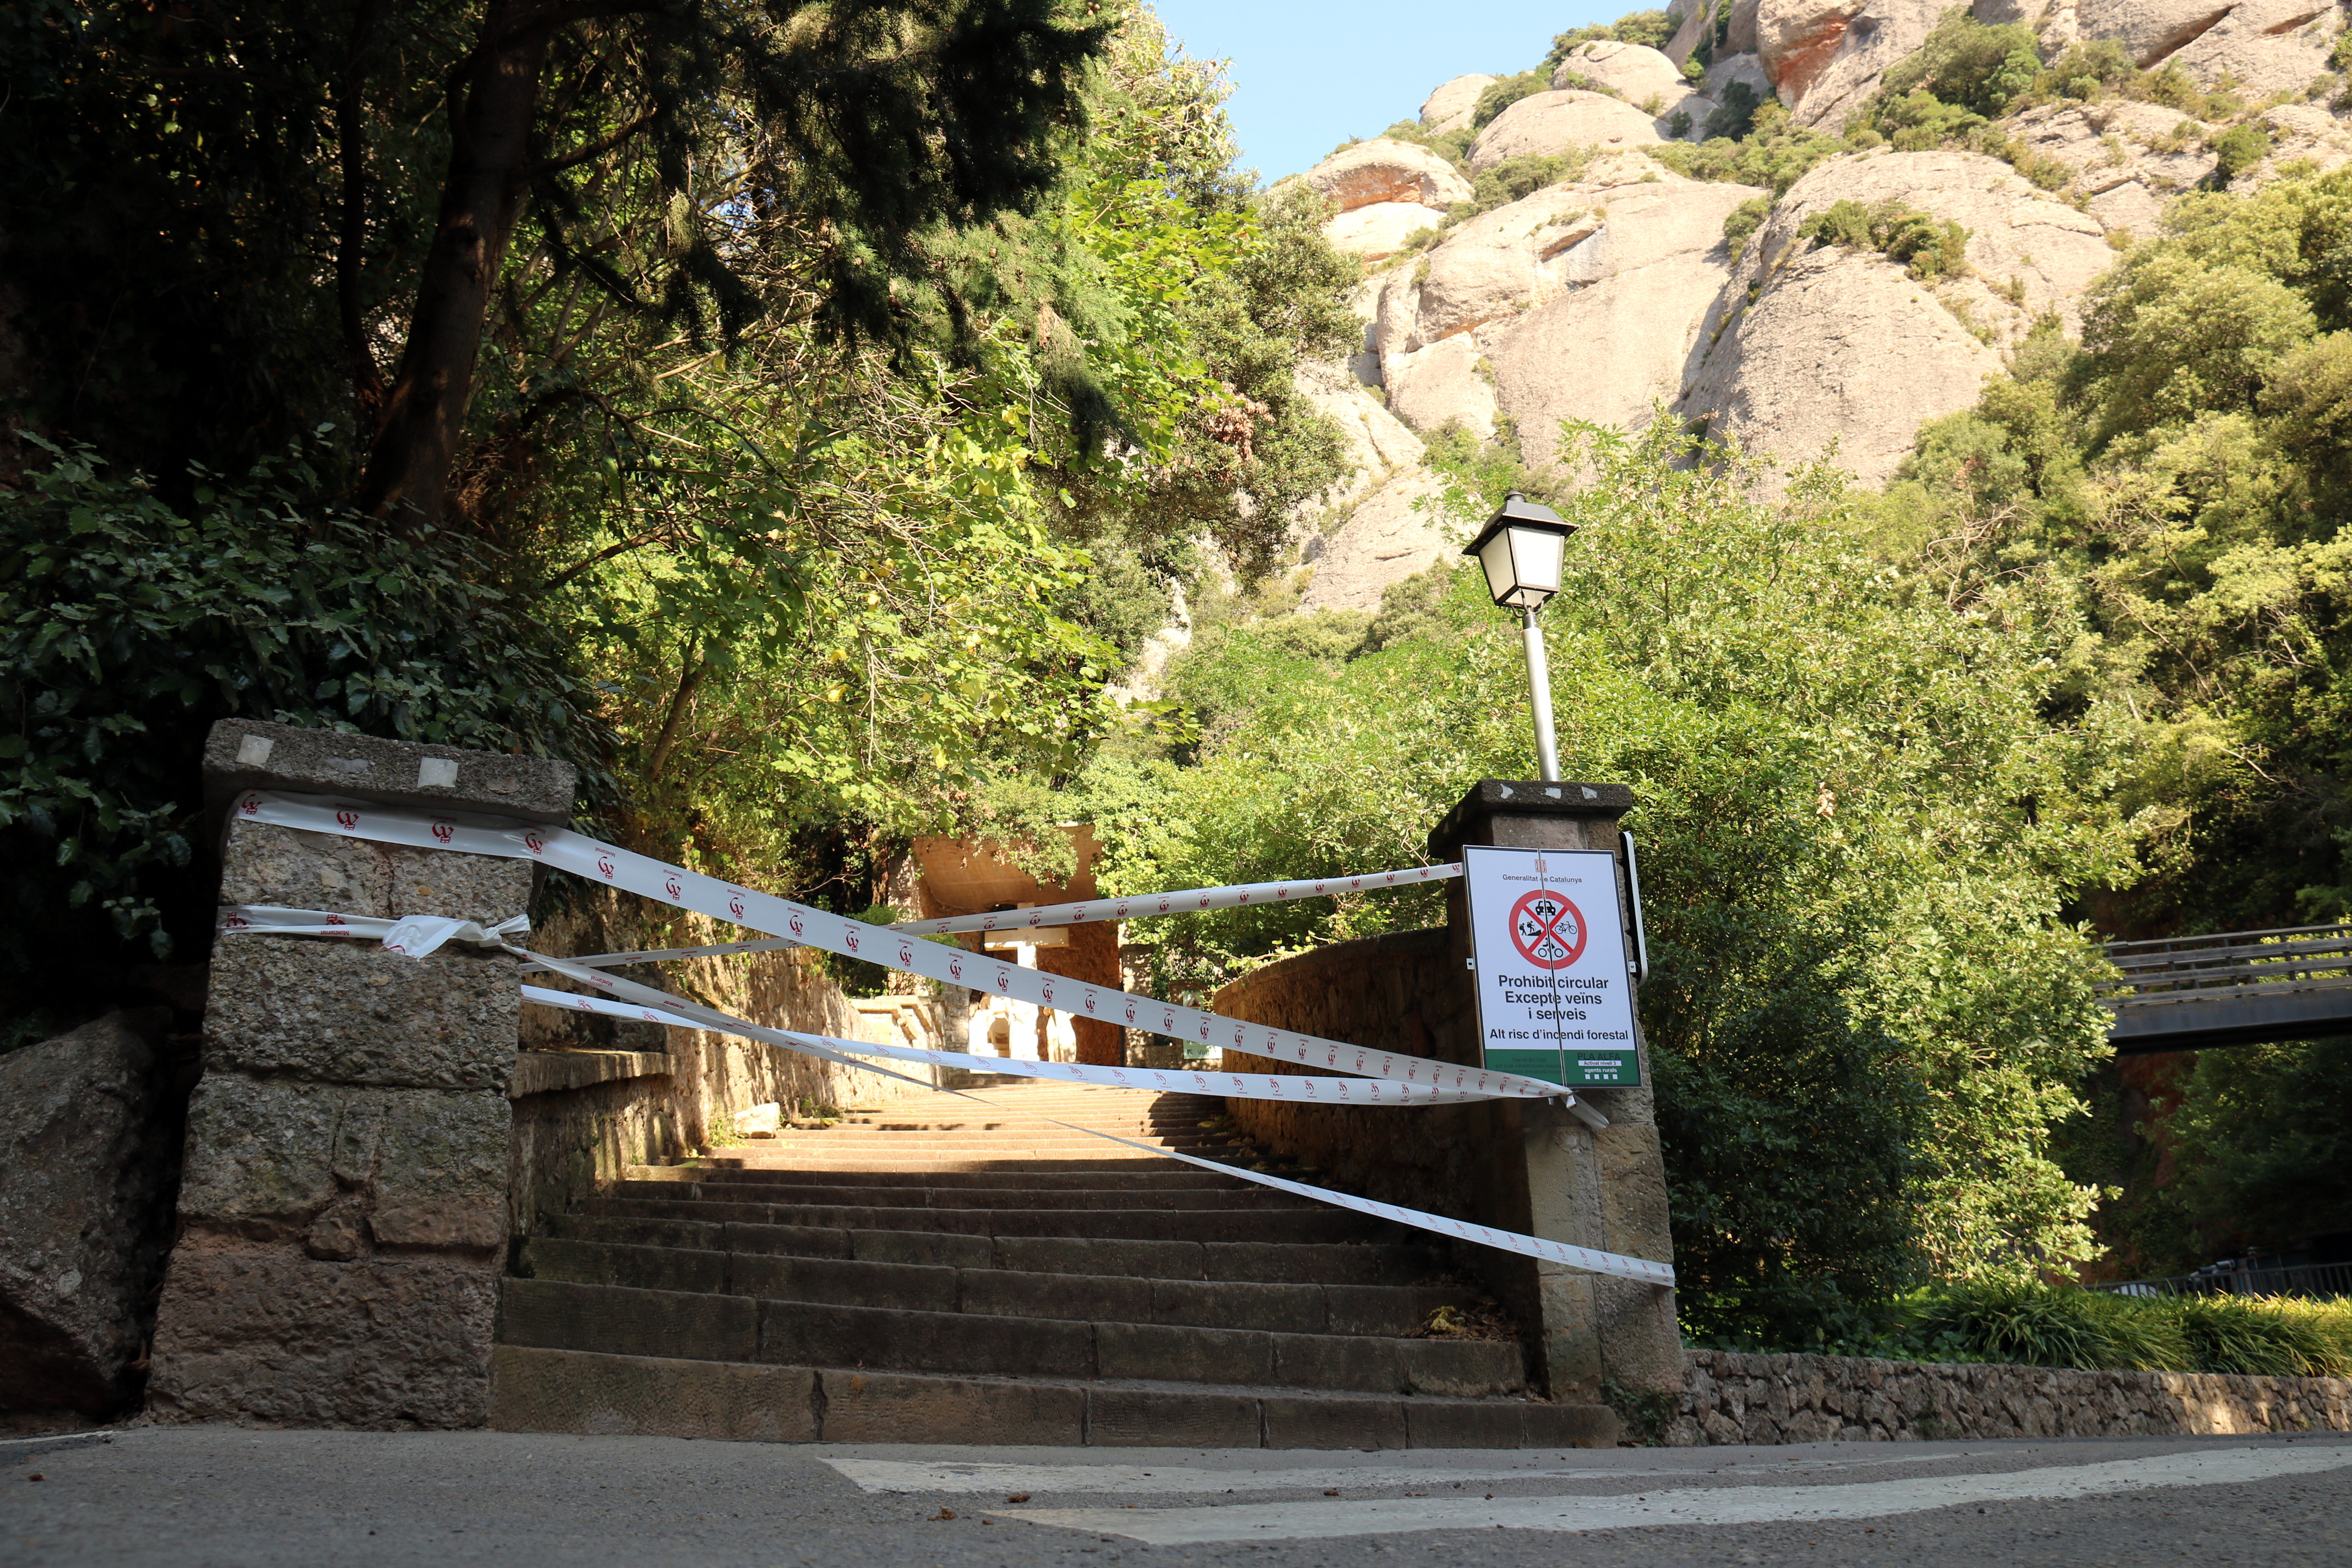 Access to the Montserrat natural park closed due to the high risk of wildfires on July 15, 2022